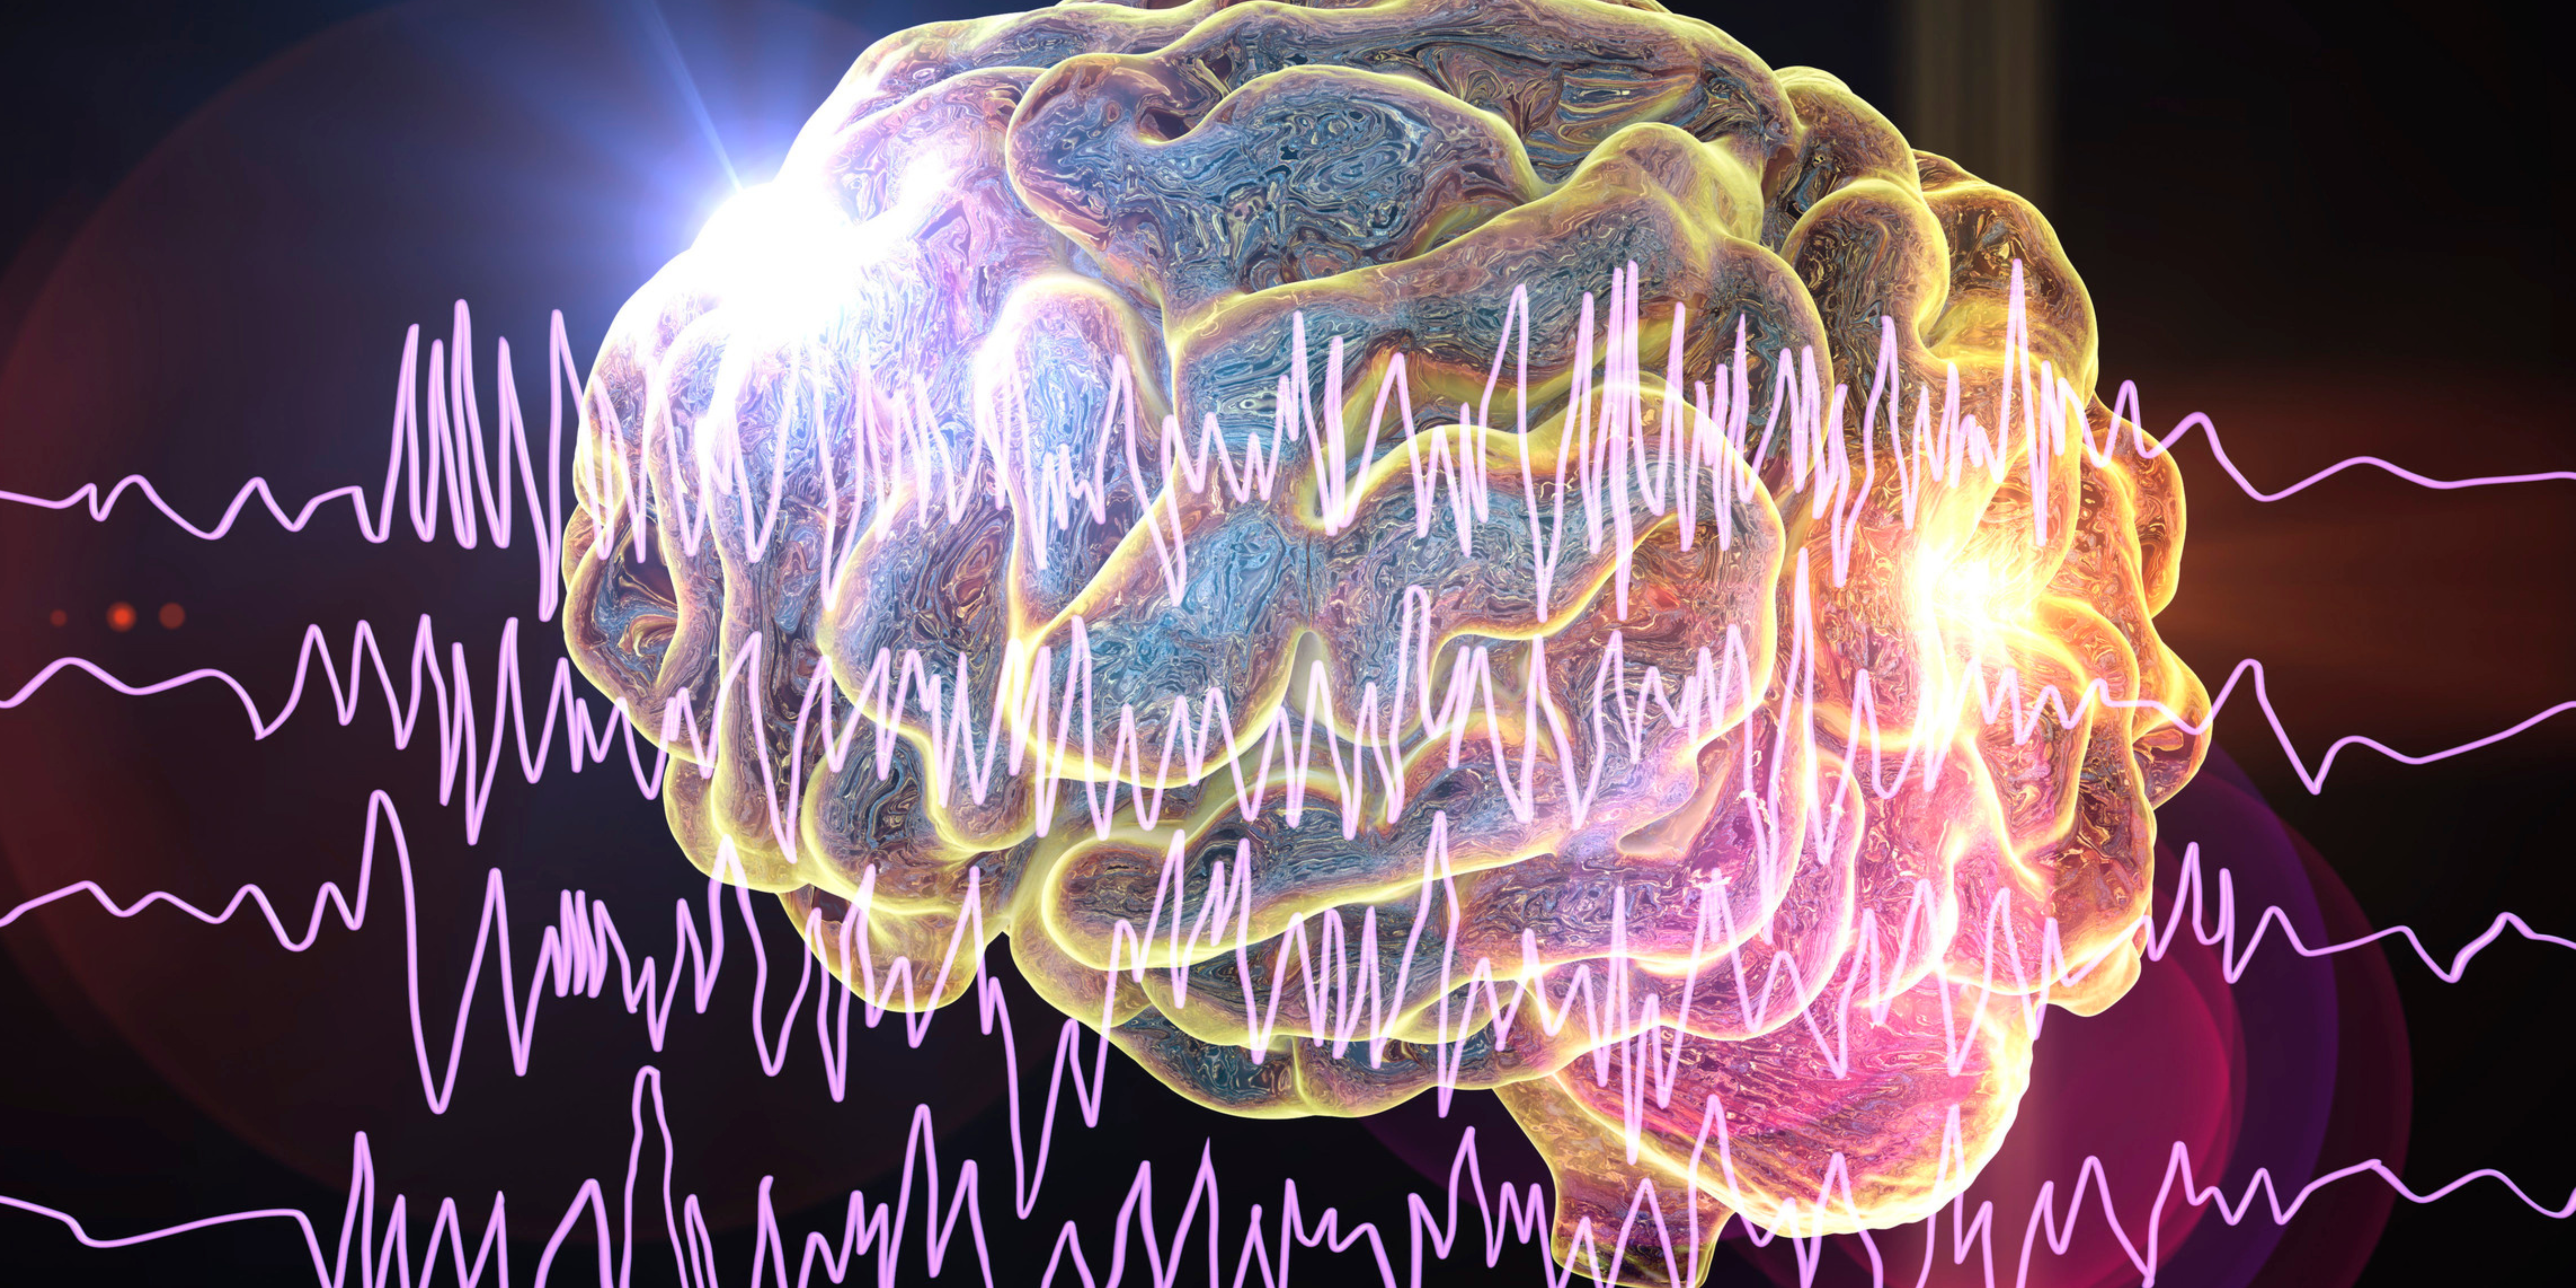 IISc Researchers Develop an Algorithm to Detect Seizures and Occurrence of Epilepsy